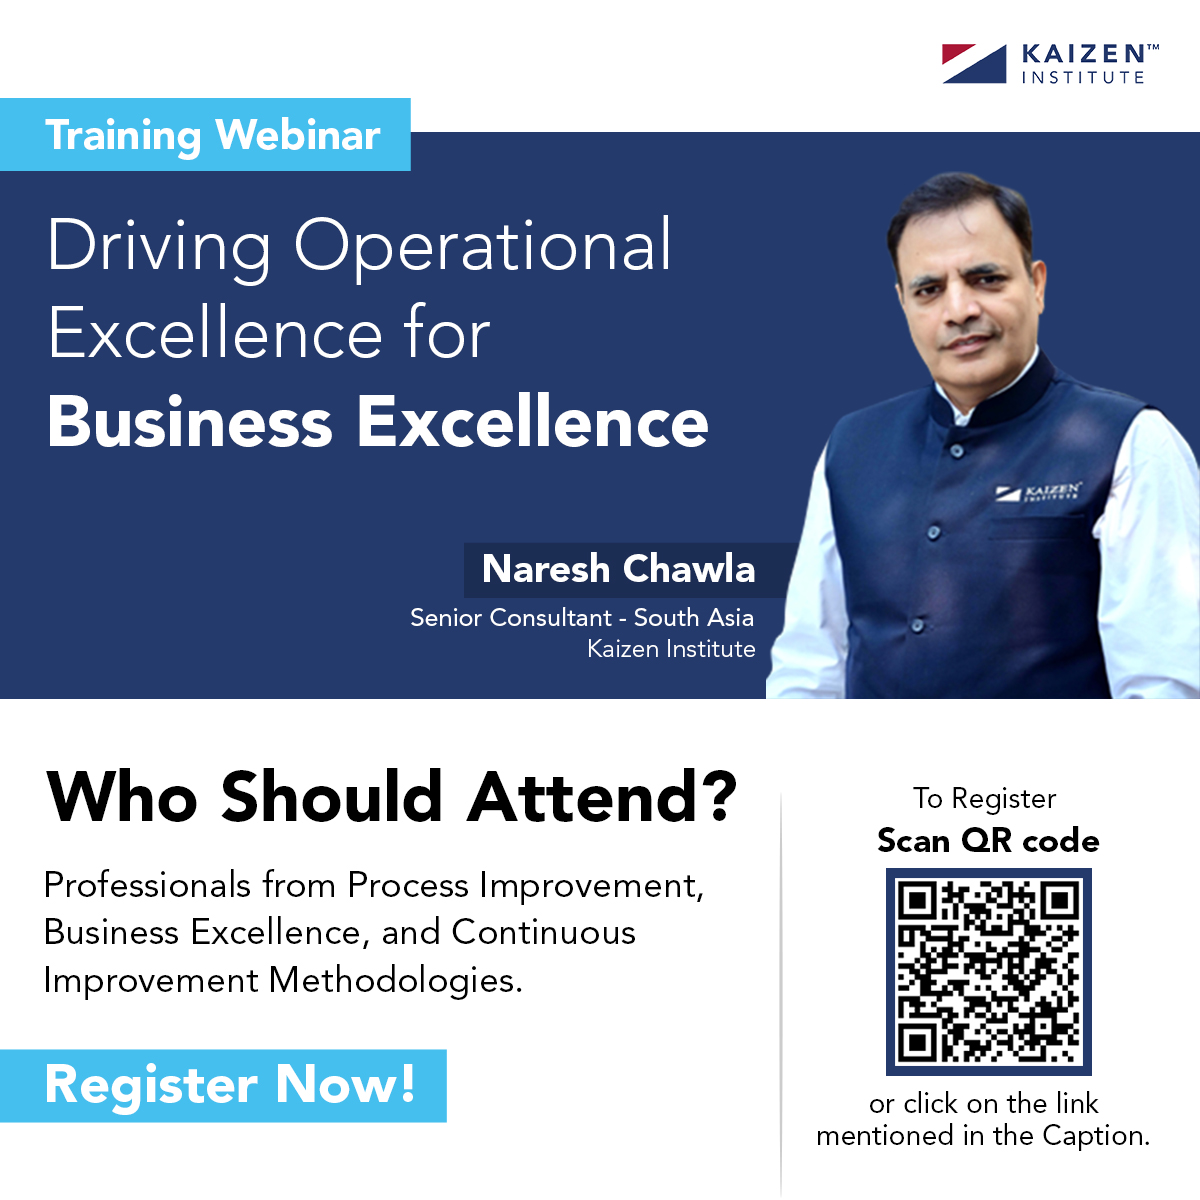 📣 Who Should Attend?  

Calling all professionals from:
🔹Process Improvement
🔹Business Excellence
🔹Continuous Improvement Methodologies

 Join us on June 26th, 2023

Register now: bit.ly/3J7Lgvv

#Webinar #OperationalExcellence #BusinessExcellence #ProcessImprovement